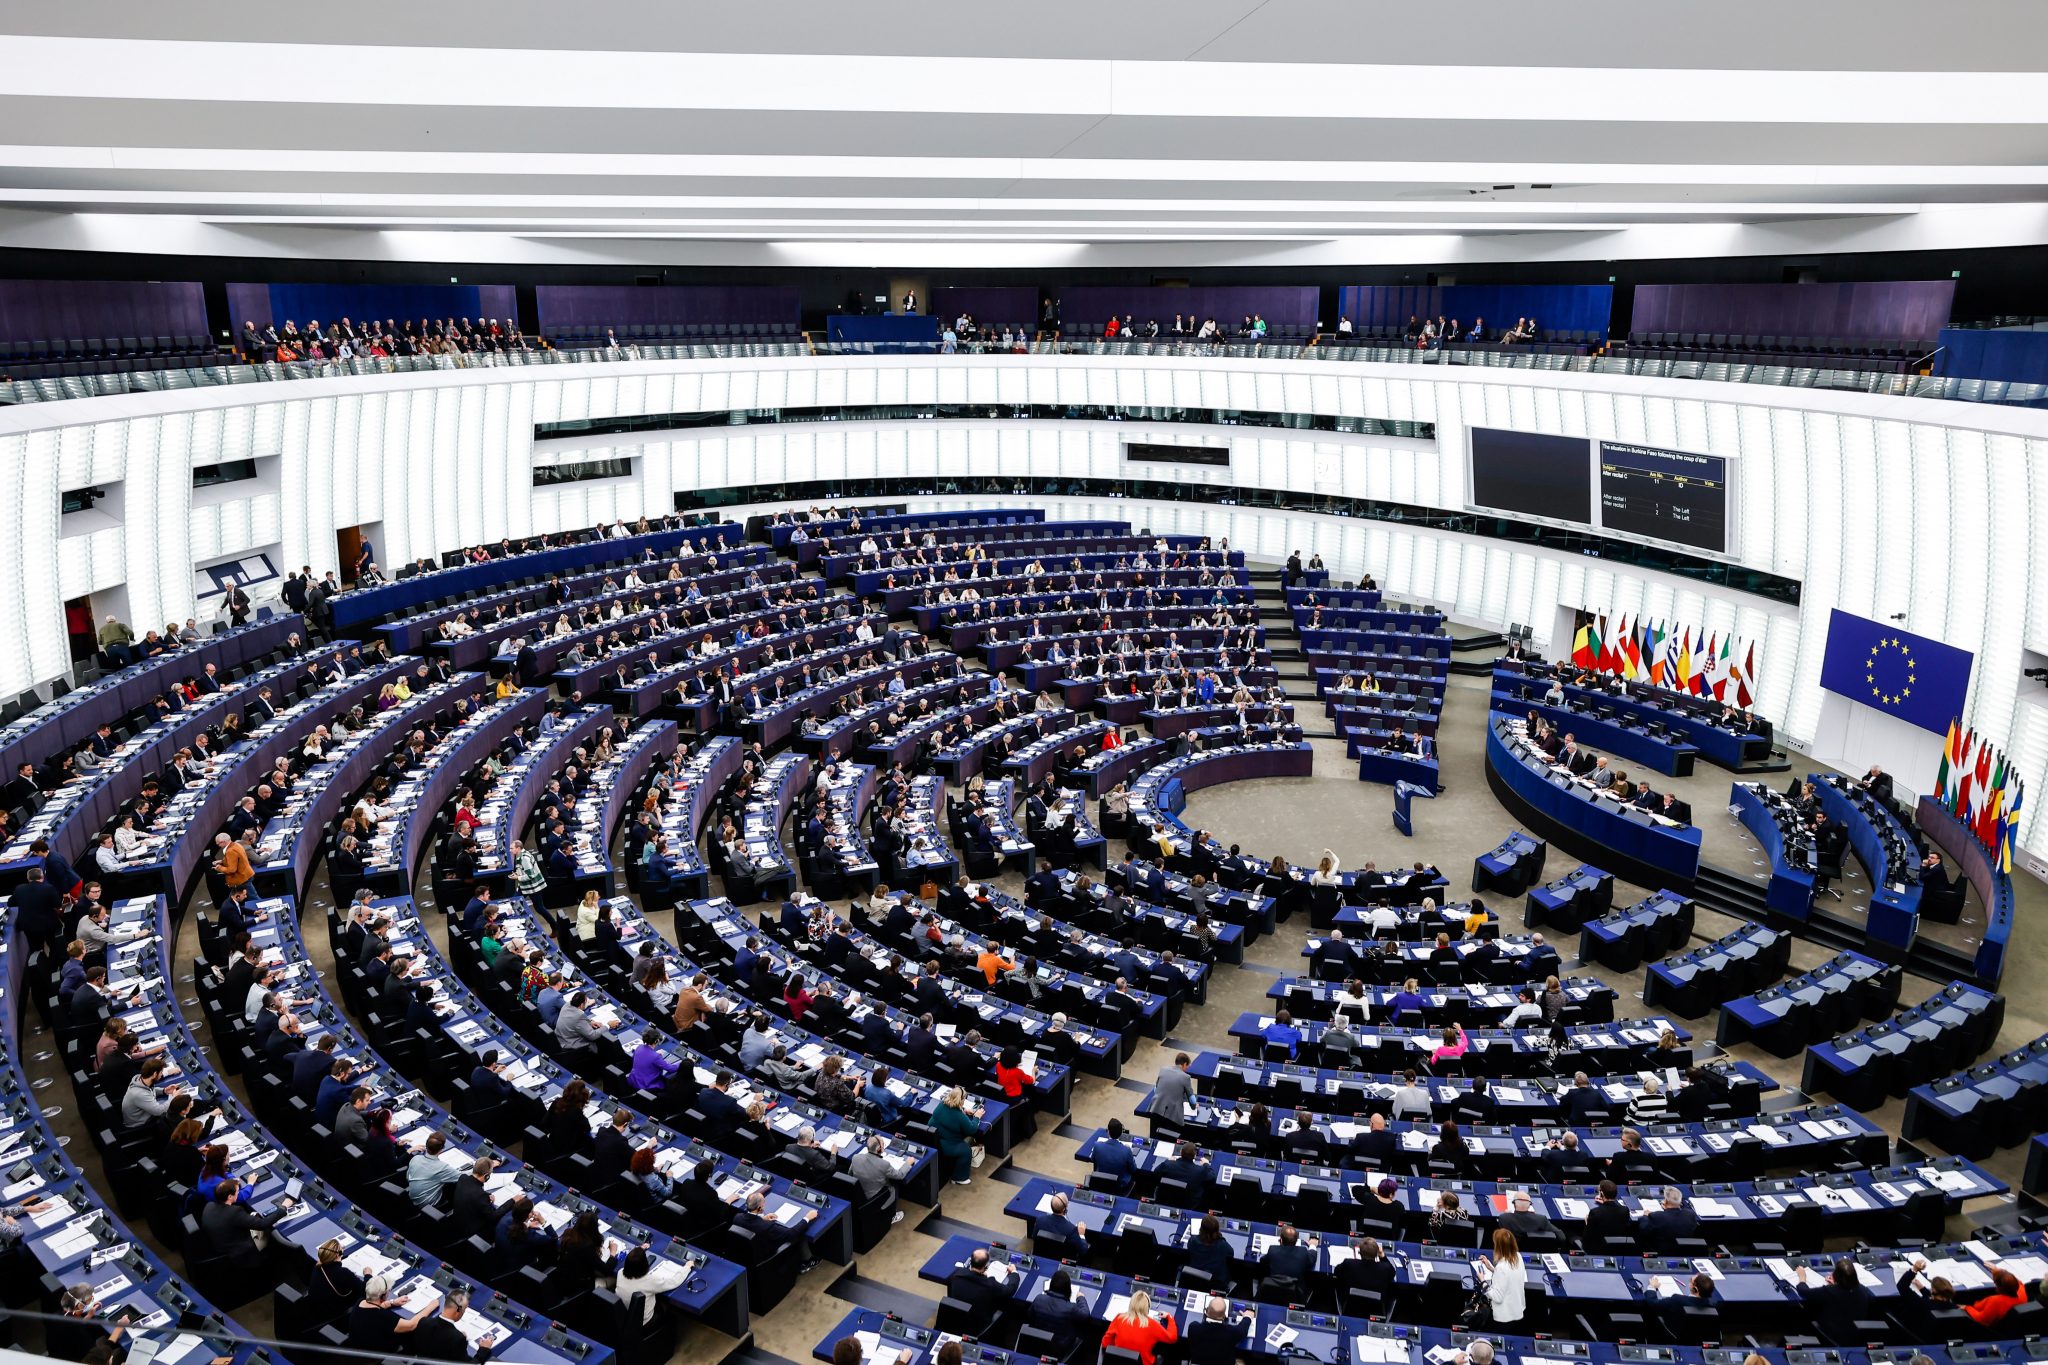 The European Parliament Is Heading in a Totalitarian Direction, Claims MEP